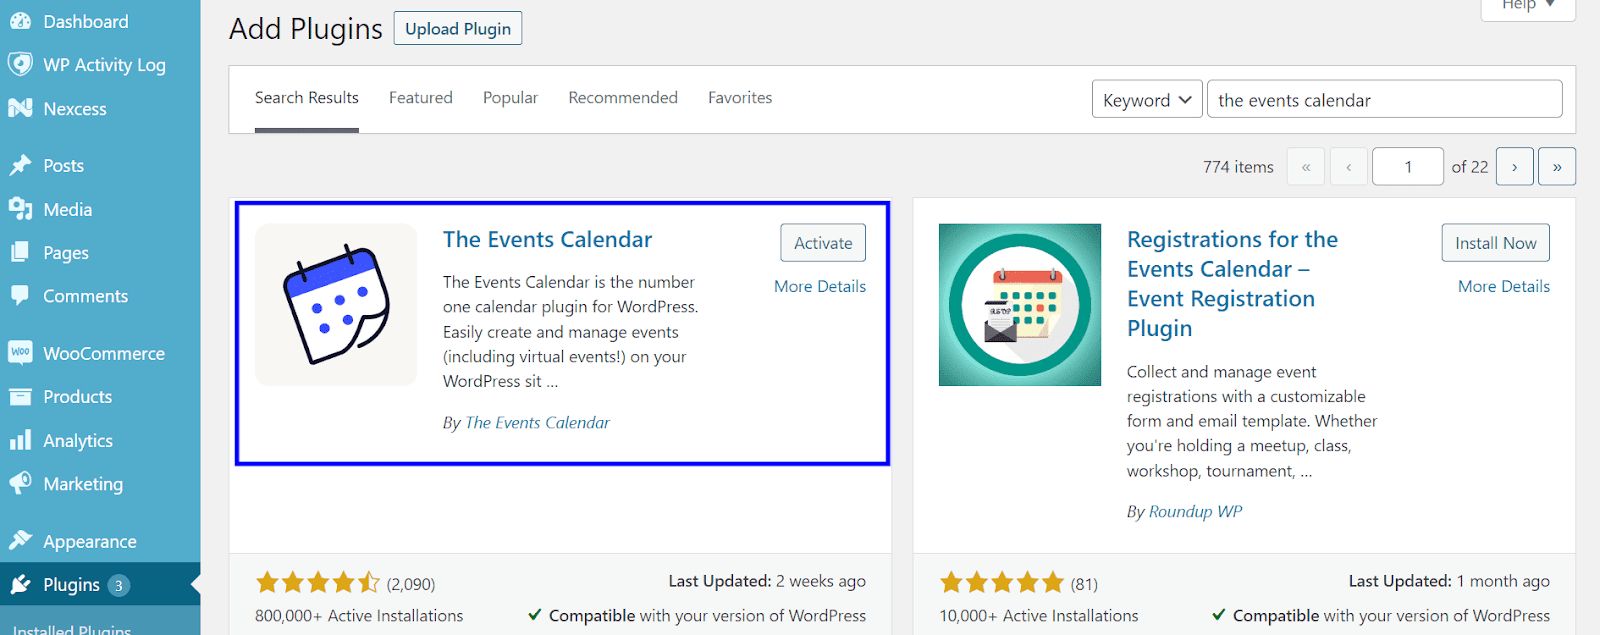 Download the Events Calendar plugin from WordPress.